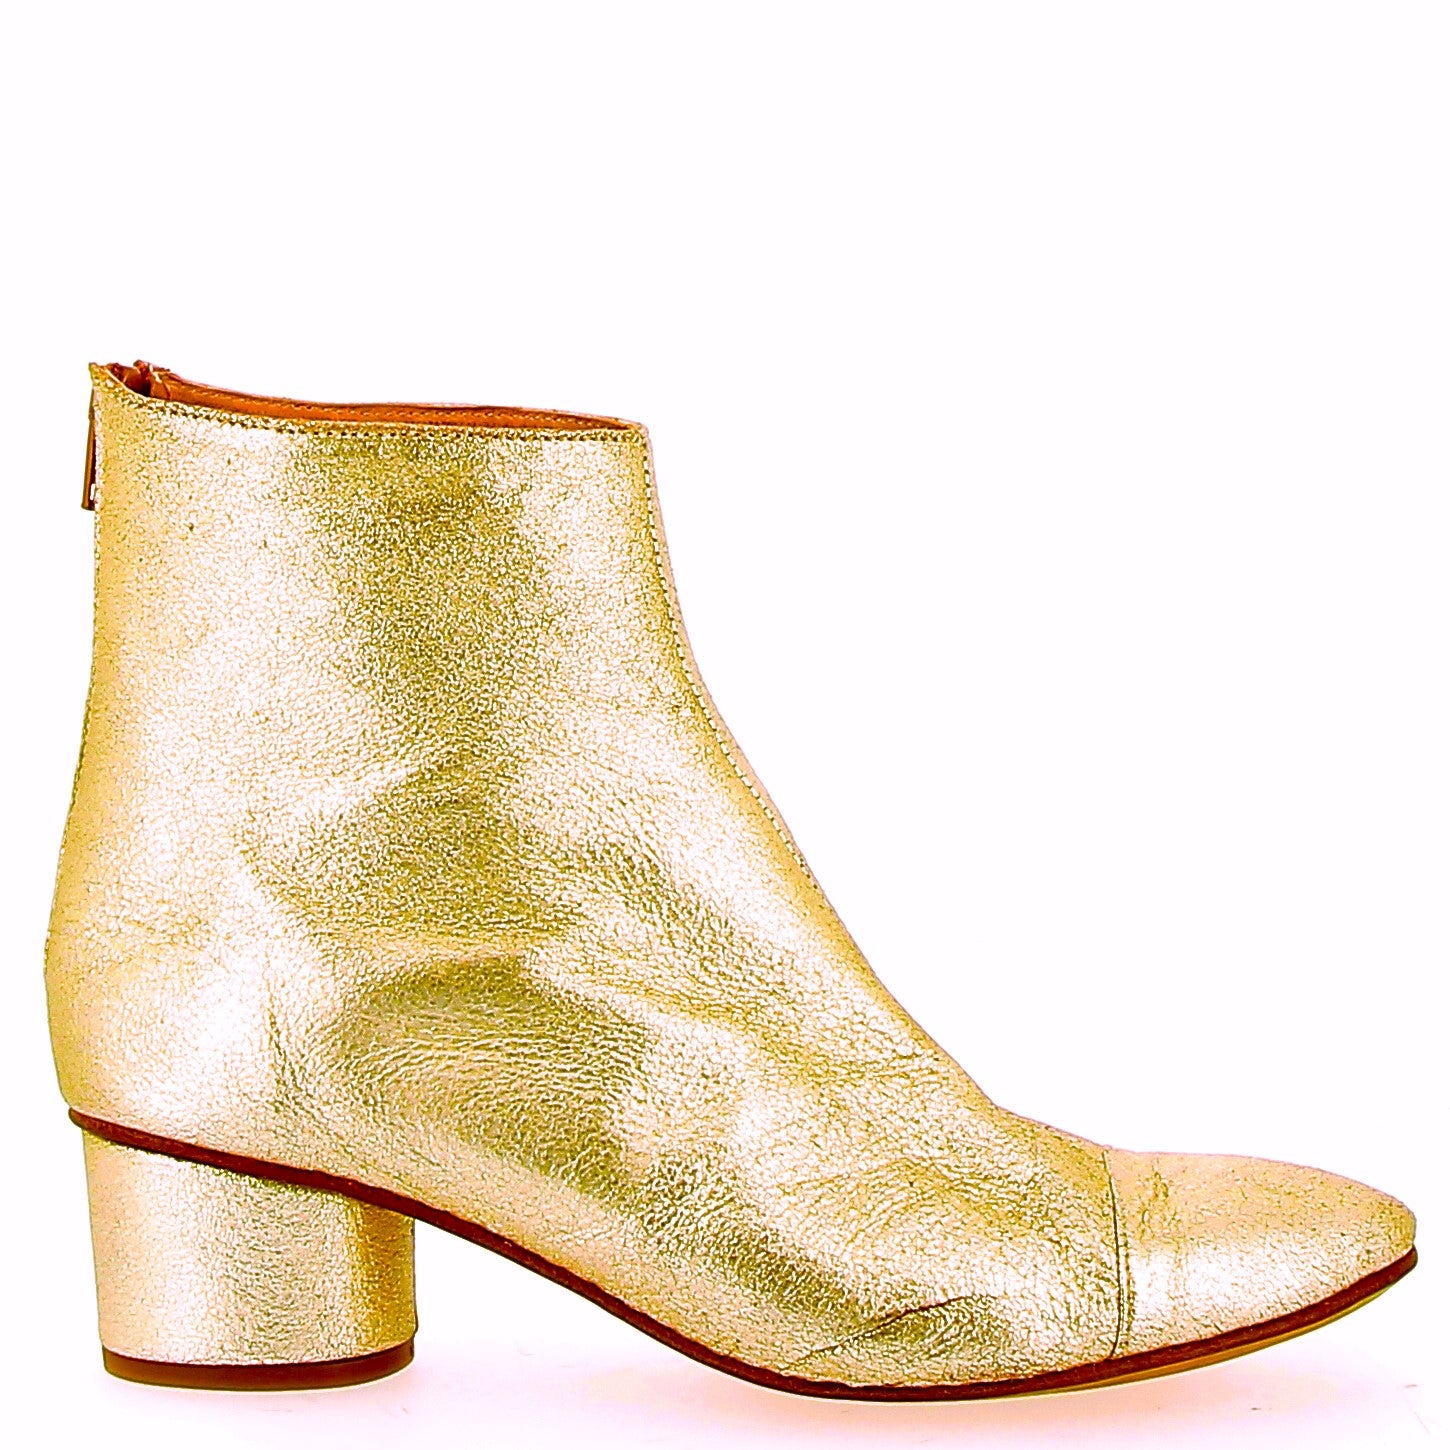 Vintage effect gold ankle boot with rounded heel